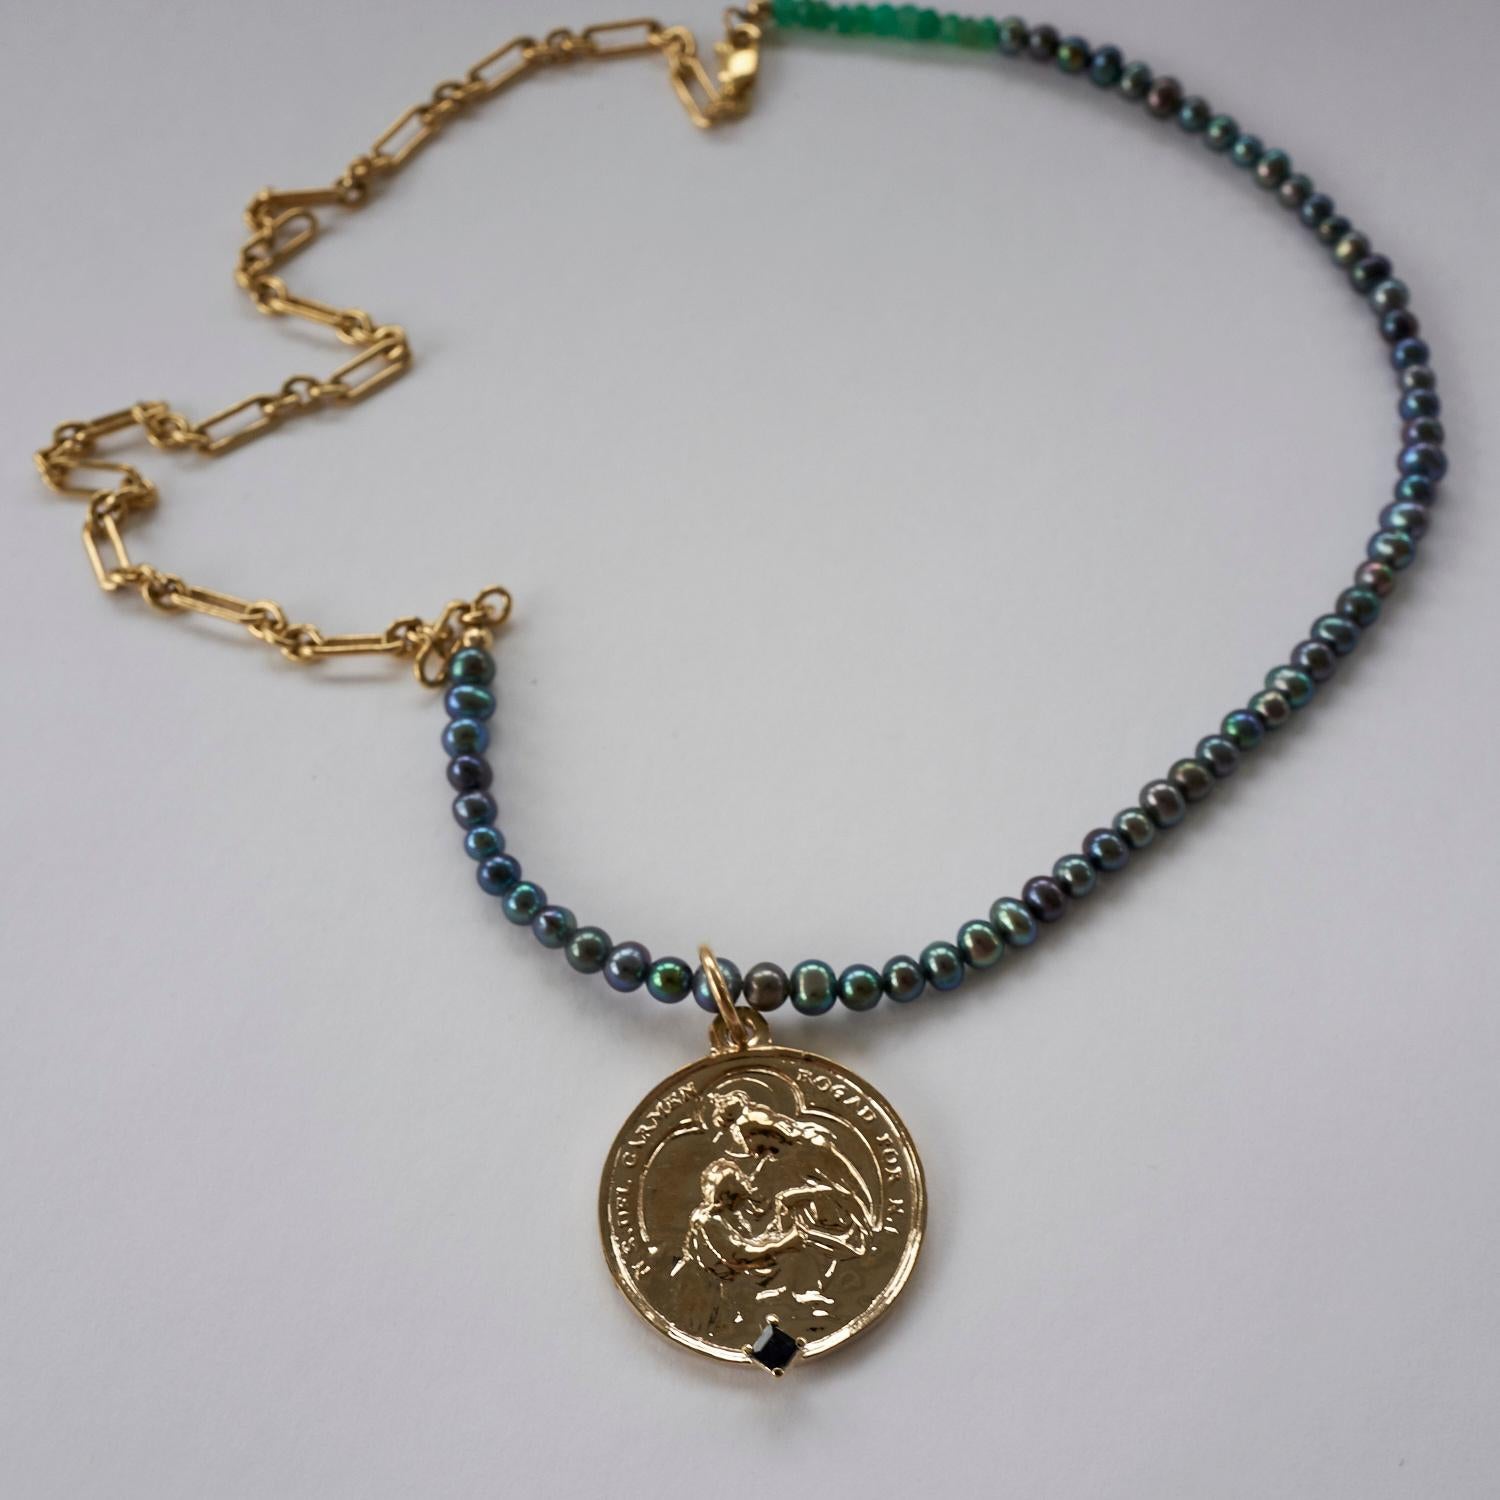 Sapphire Virgin Mary Black Pearl Medal Coin Pendant Chain Necklace J Dauphin

Exclusive piece with Virgin Mary Medal Round Coin pendant in Bronze with a square Emerald  set in Gold prong and a gold filled Chain. Necklace is 22